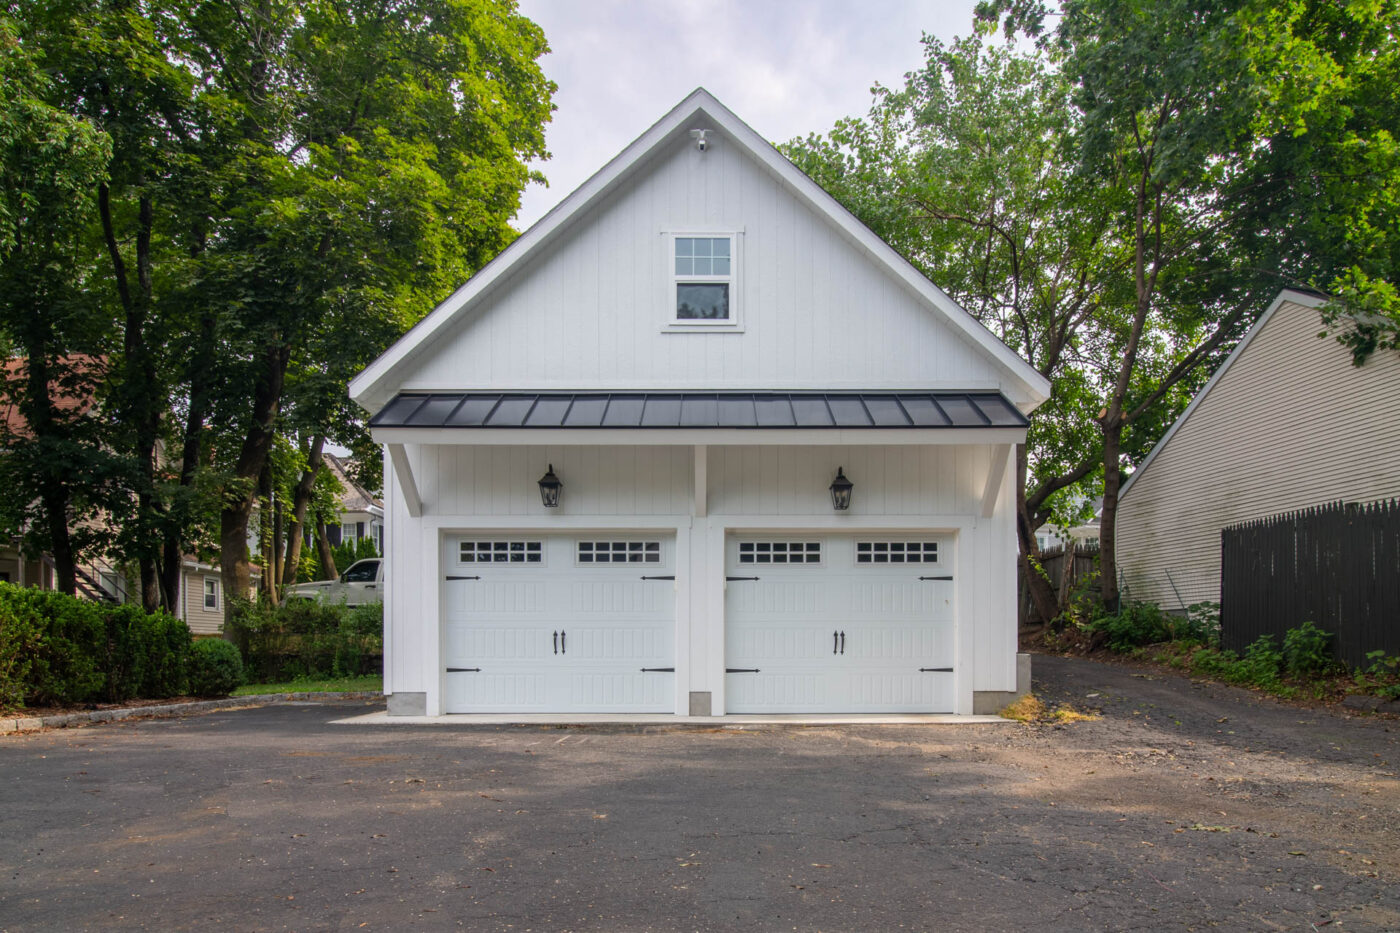 a White 24x20 Attic Workshop 2-Car Garage with wood siding and a rear hip roof in Greenwich, CT built by Sheds Unlimited